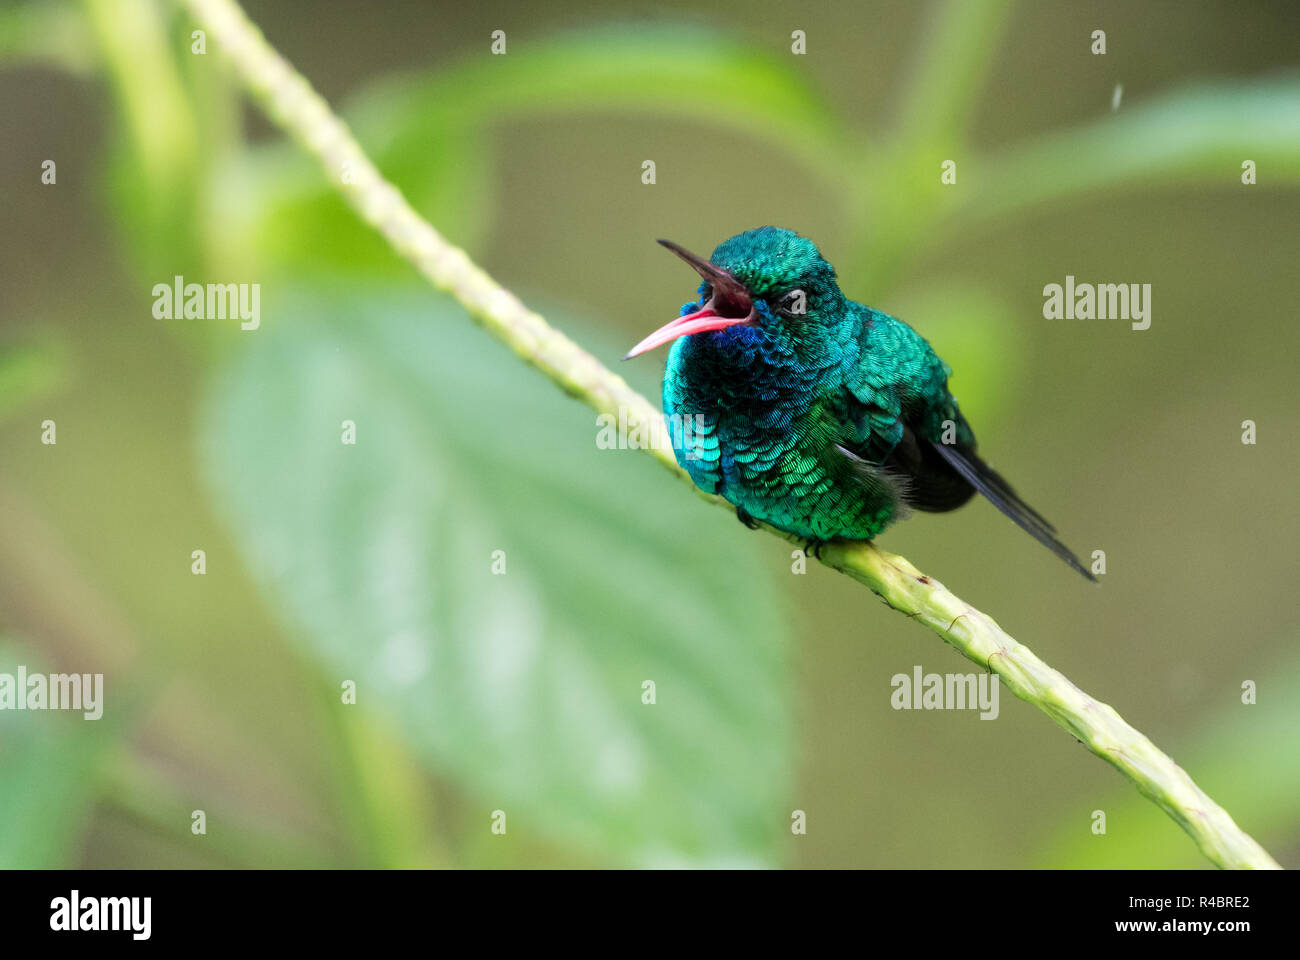 Blue-chinned Sapphire, Chlorestes notata, perching in a plant and chirping with beak open Stock Photo